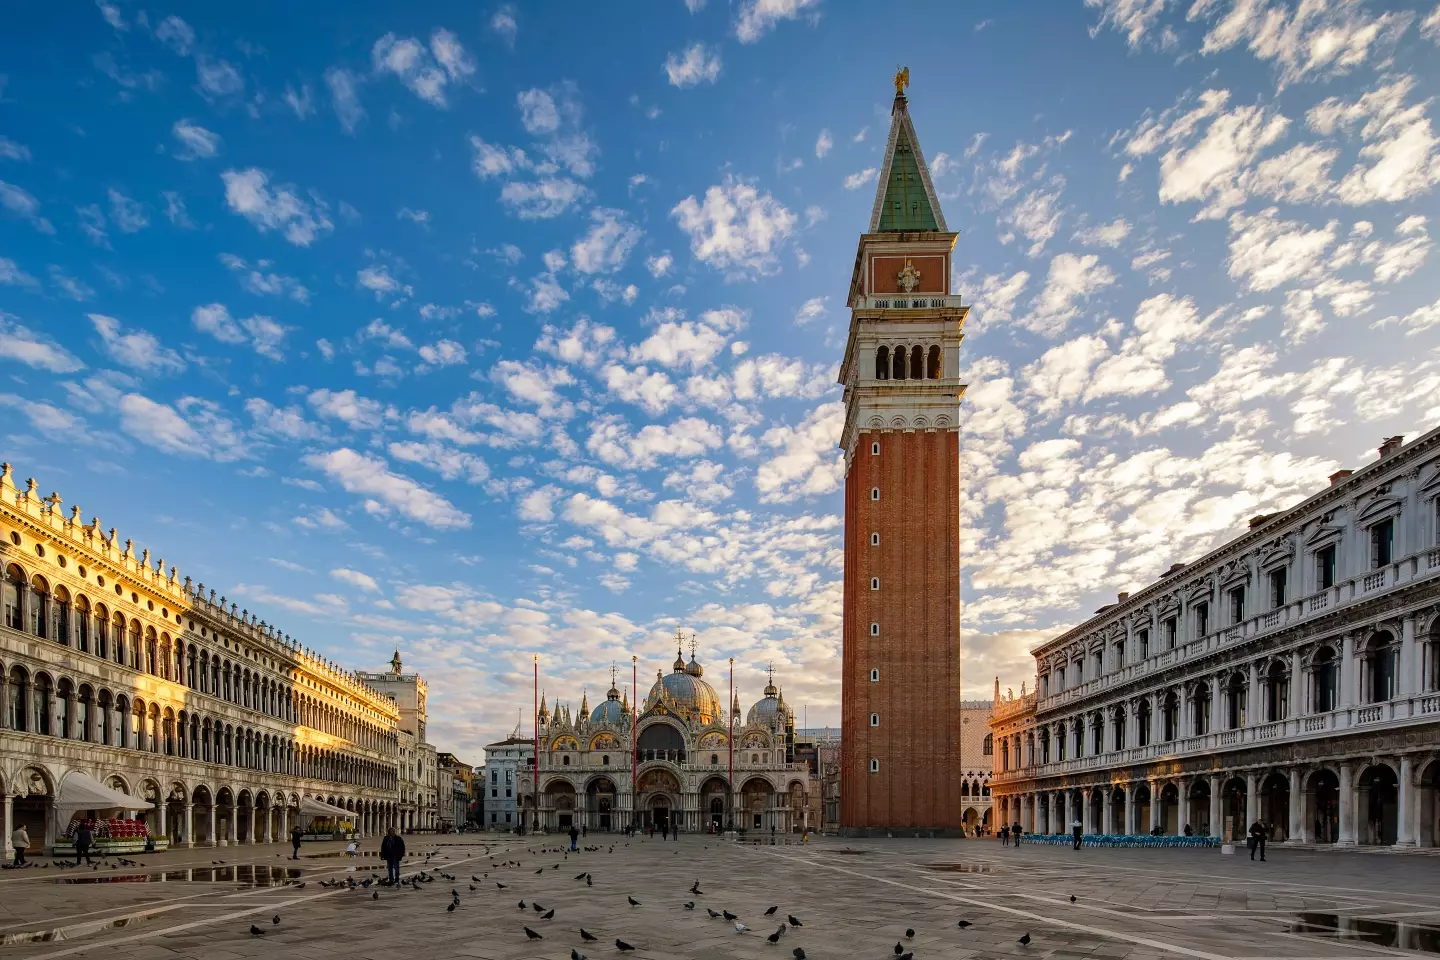 The traveller claimed she arrived at St. Mark's Square to find that everyone was 'covered up'.